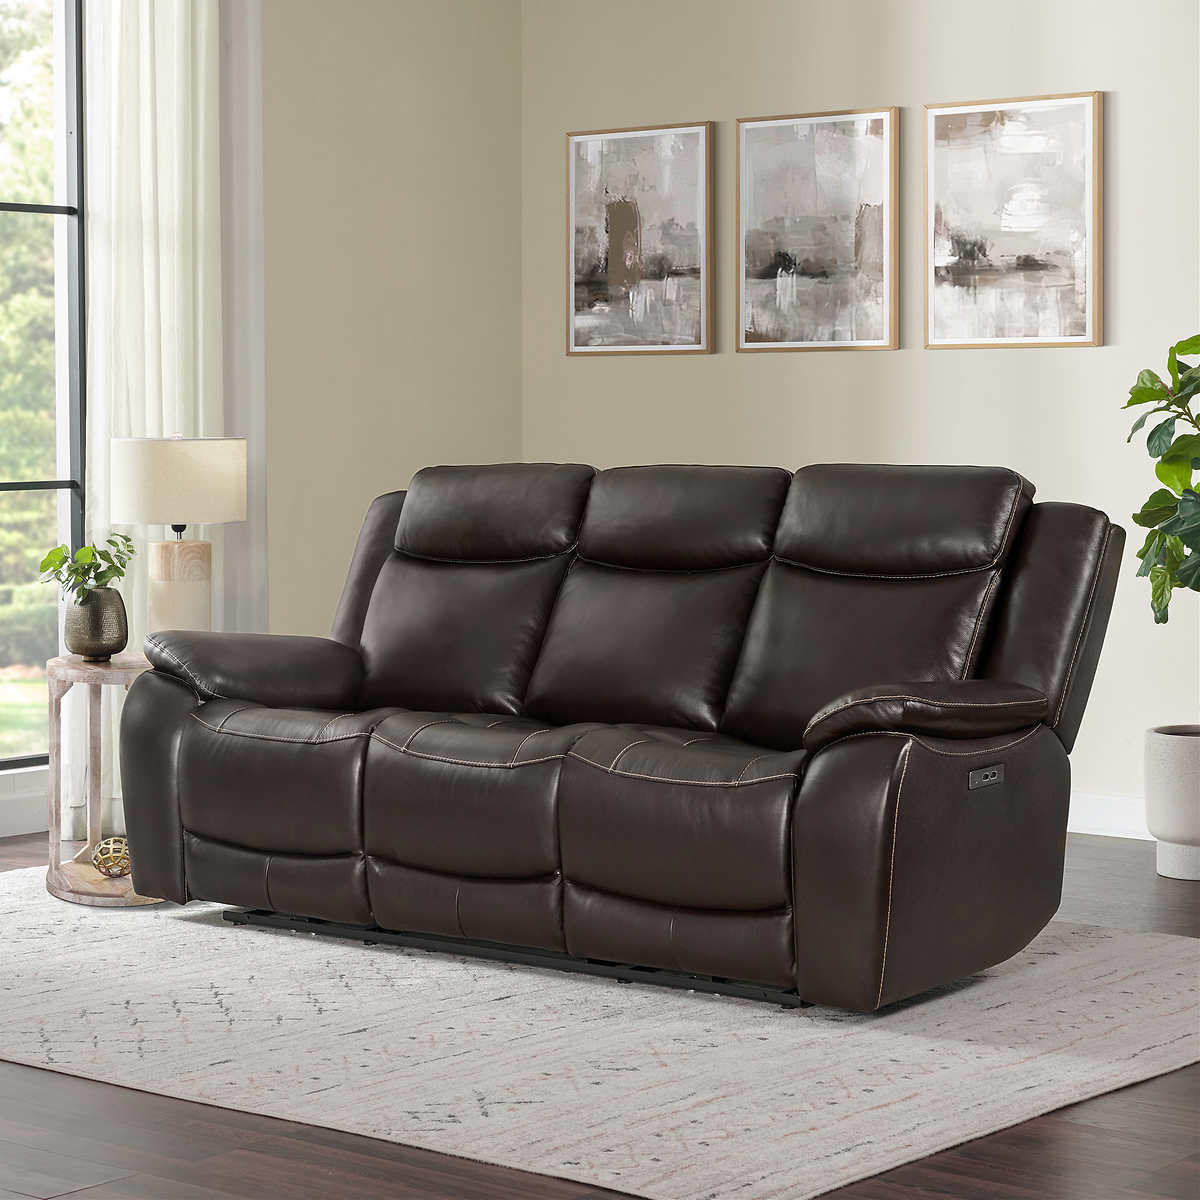 NEW - Costco - Harvey Leather Power Reclining Sofa with Power Headrests - Retail $1399